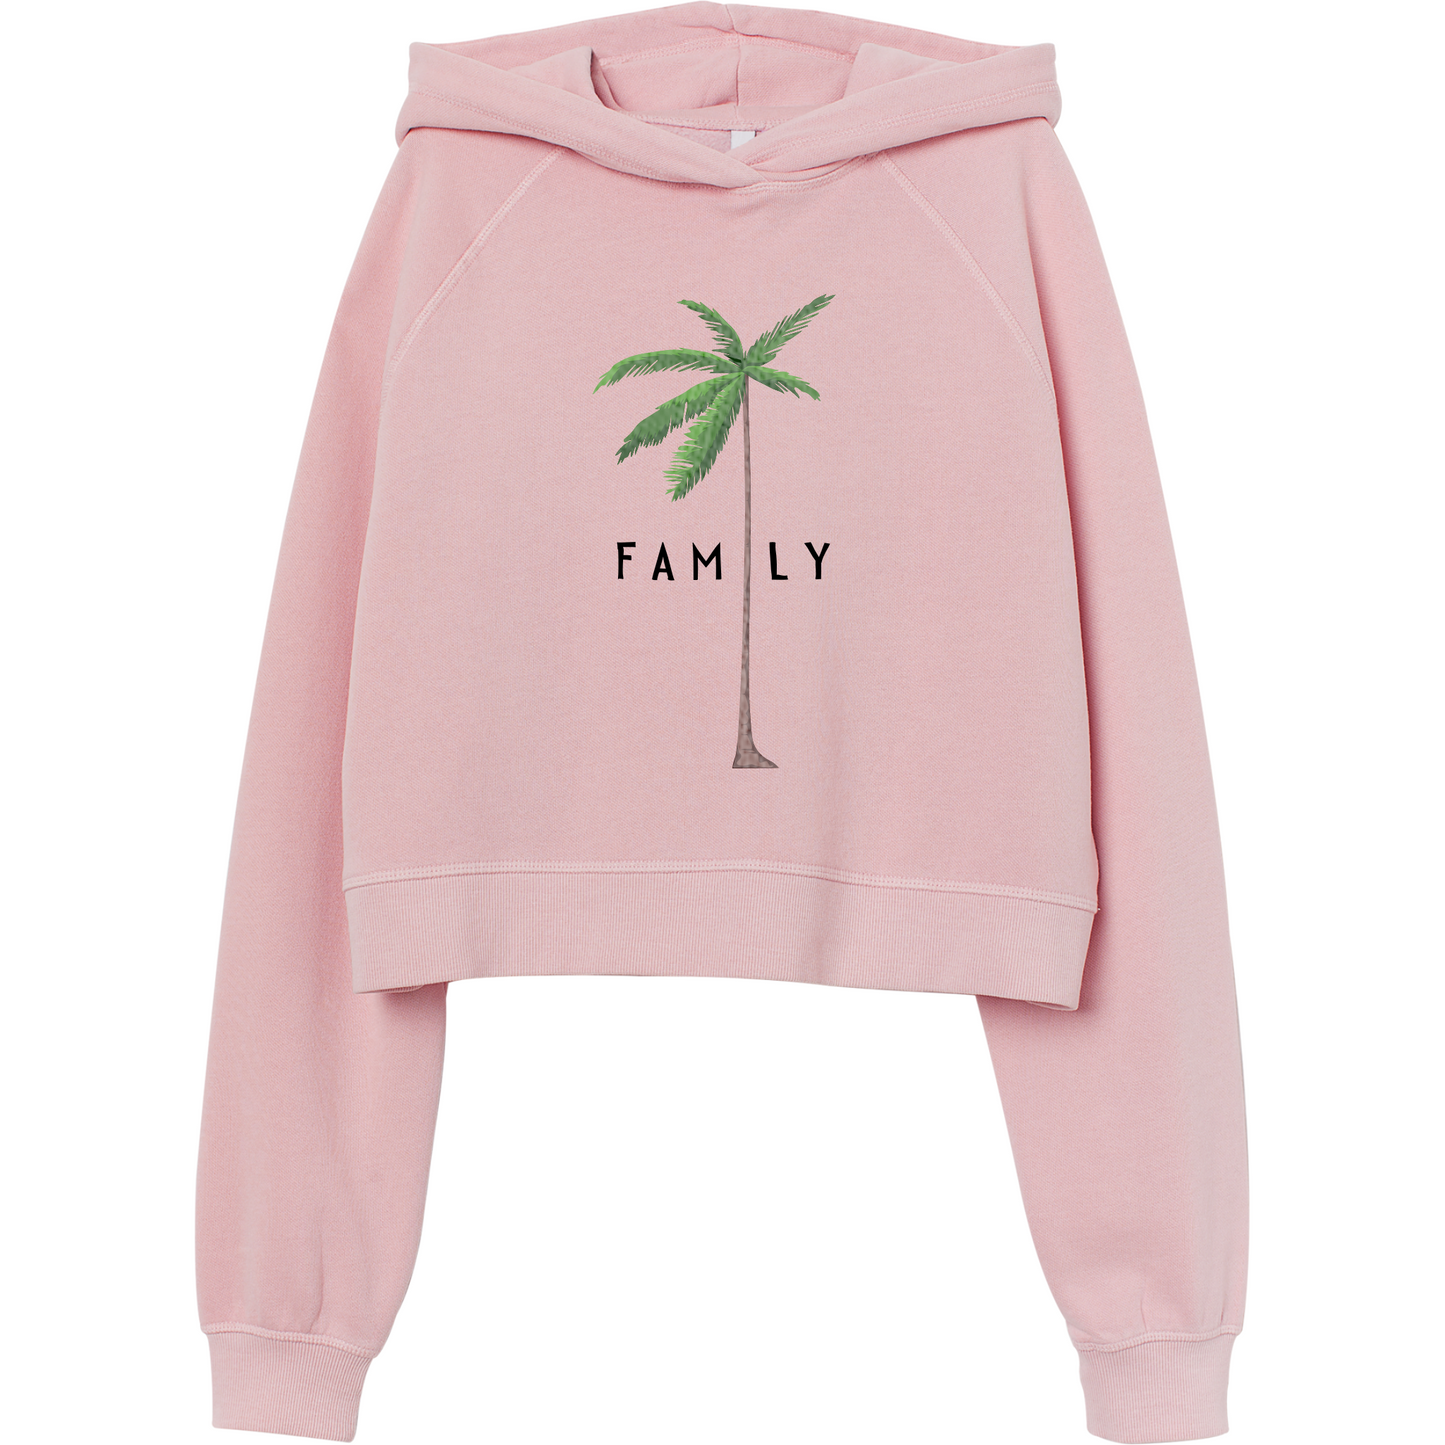 (Shirt not included) Family Palm tree 4.5" x 7"-  Matte Clear Film Transfer